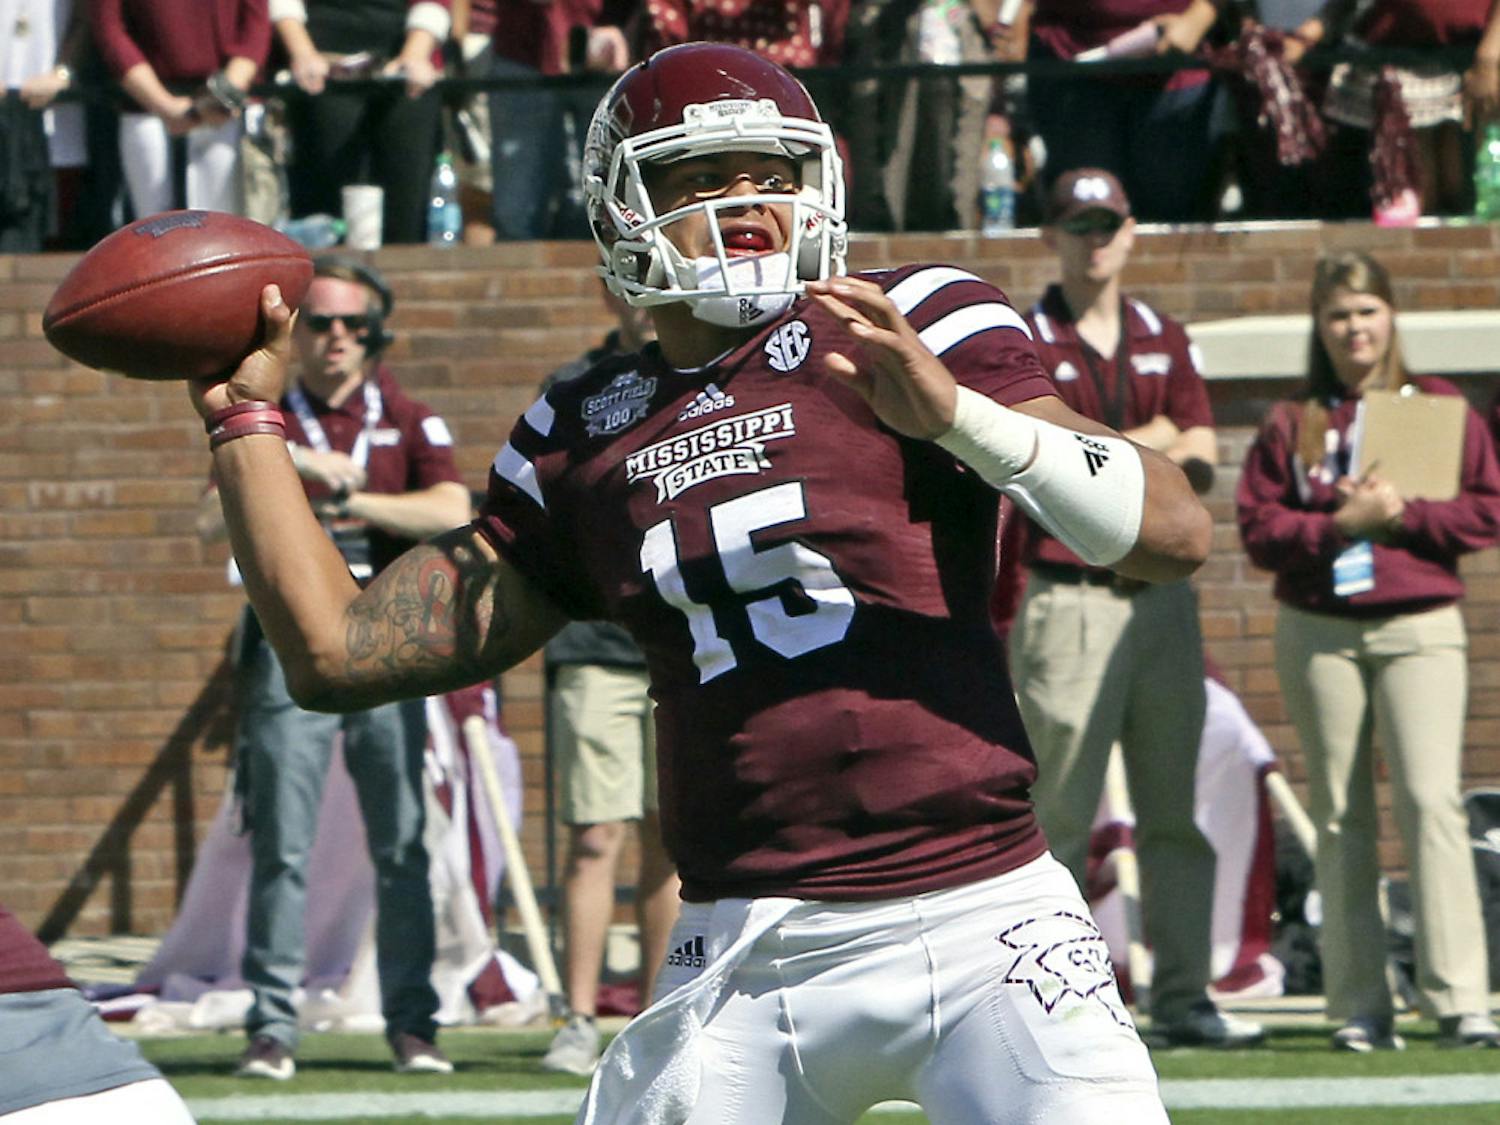 Mississippi State quarterback Dak Prescott (15) throws a pass during the second half of an NCAA college football game against Texas A&amp;M in Starkville, Miss., Saturday, Oct. 4, 2014. MSU won 48-31.